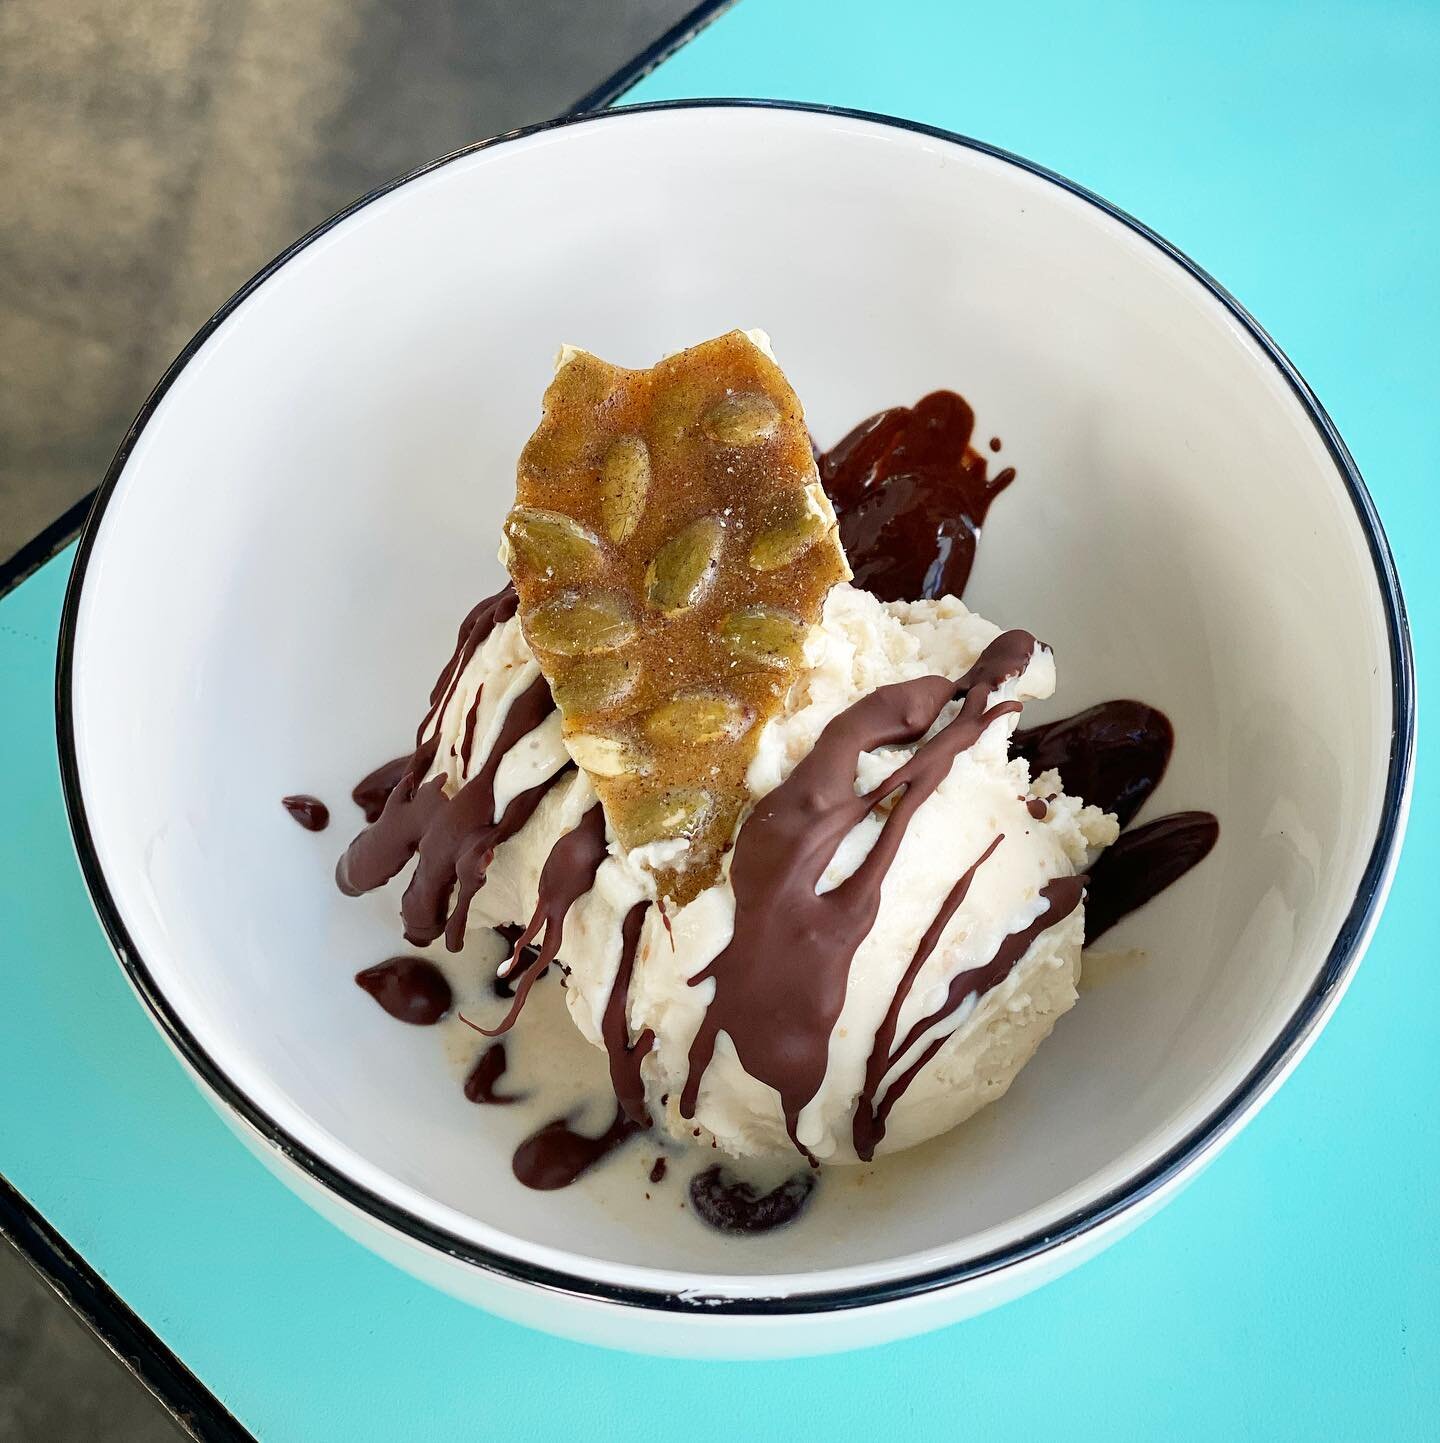 This one&rsquo;s for all you ice cream lovers!!! #happyfriday 

We can&rsquo;t get enough of our seasonal Mazap&aacute;n Ice Cream w/ a dark mole chocolate sauce &amp; pasilla pepita brittle! 

The ultimate weekend treat that pairs extremely well fol